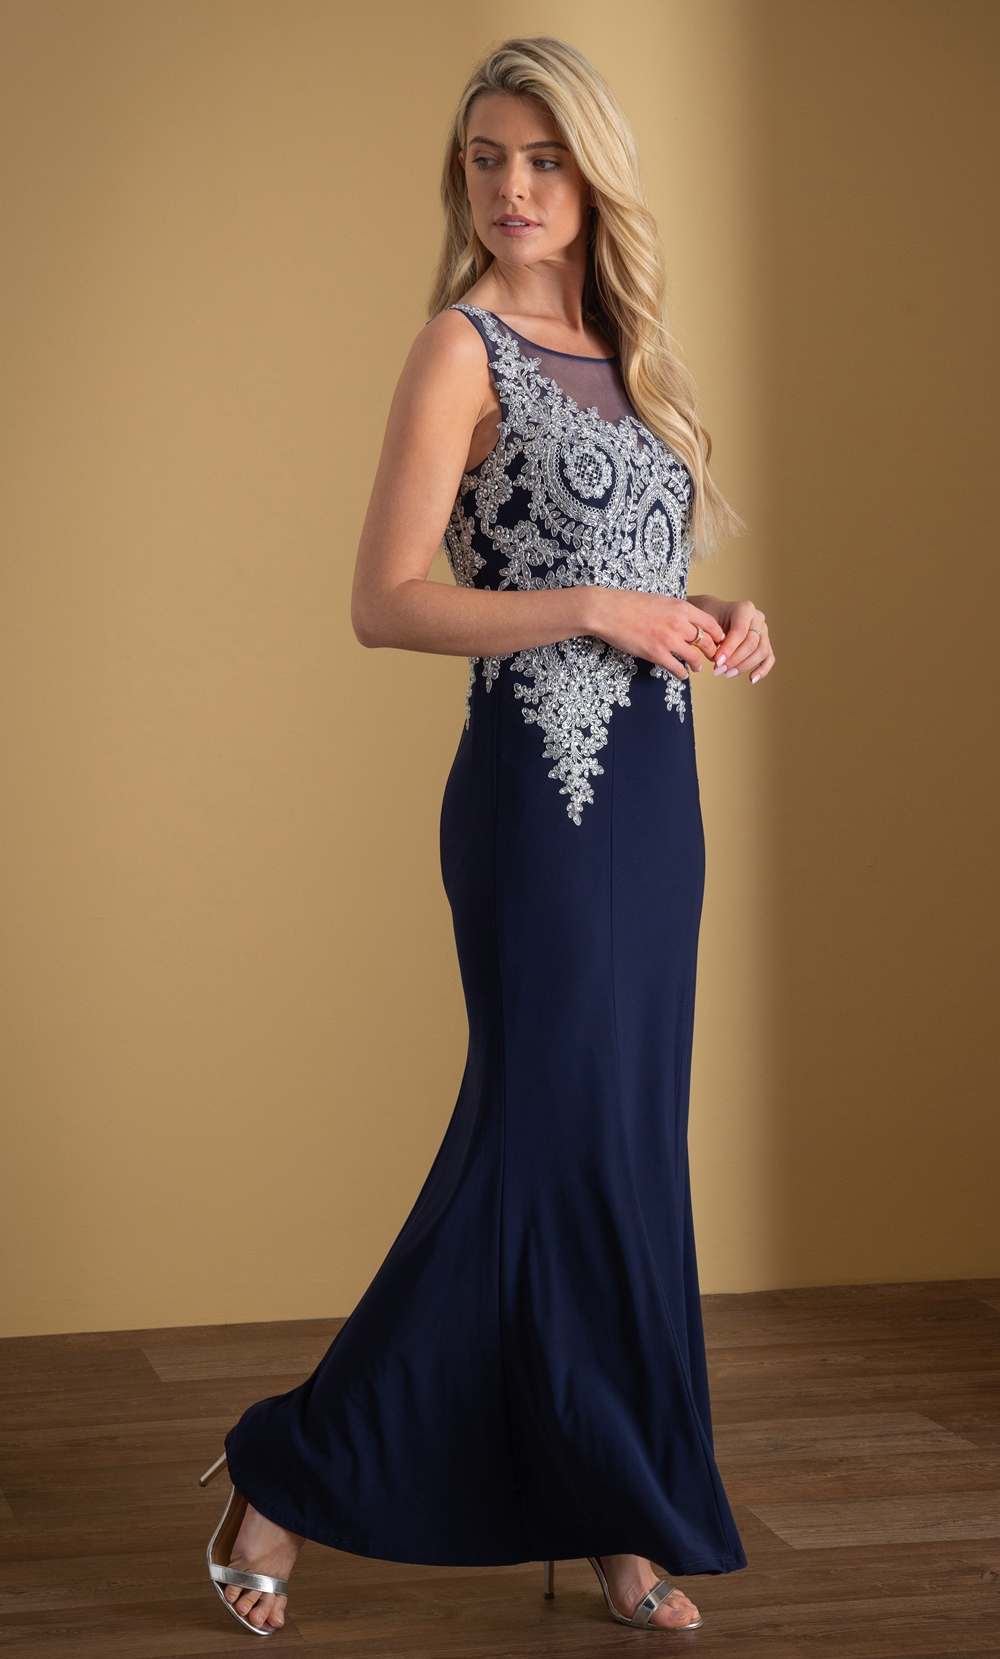 Elegant Long Evening Dress | Half Sleeves Fishtail with Sequins -  Ever-Pretty UK